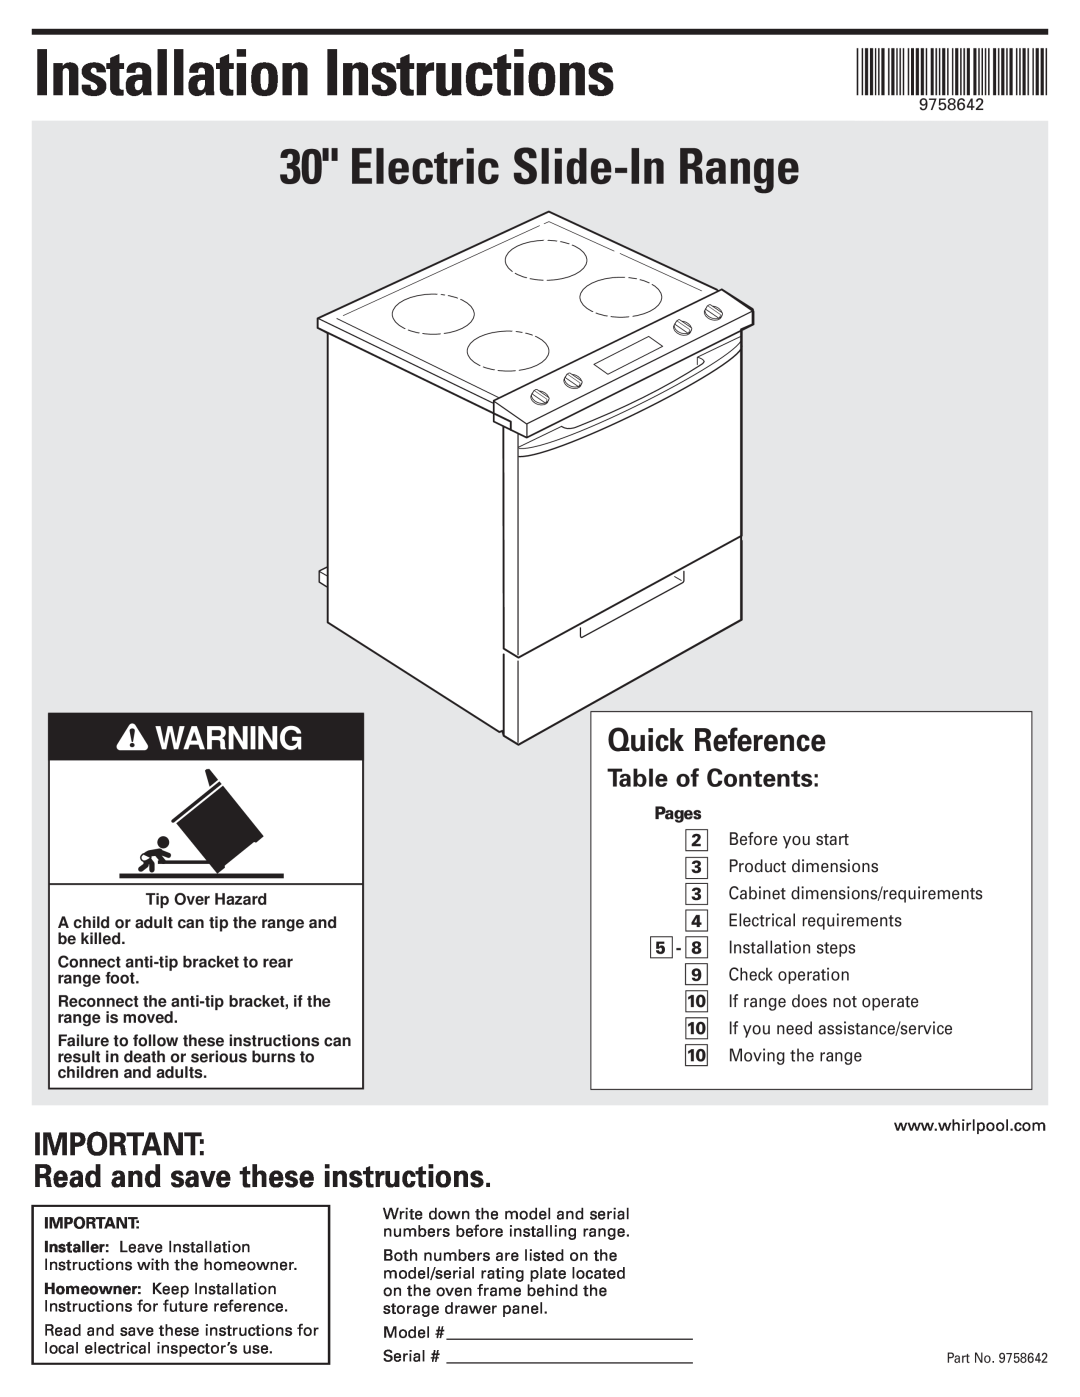 Whirlpool 9.76E+13 installation instructions Table of Contents, Connect anti-tip bracket to rear range foot, 9757, Pages 